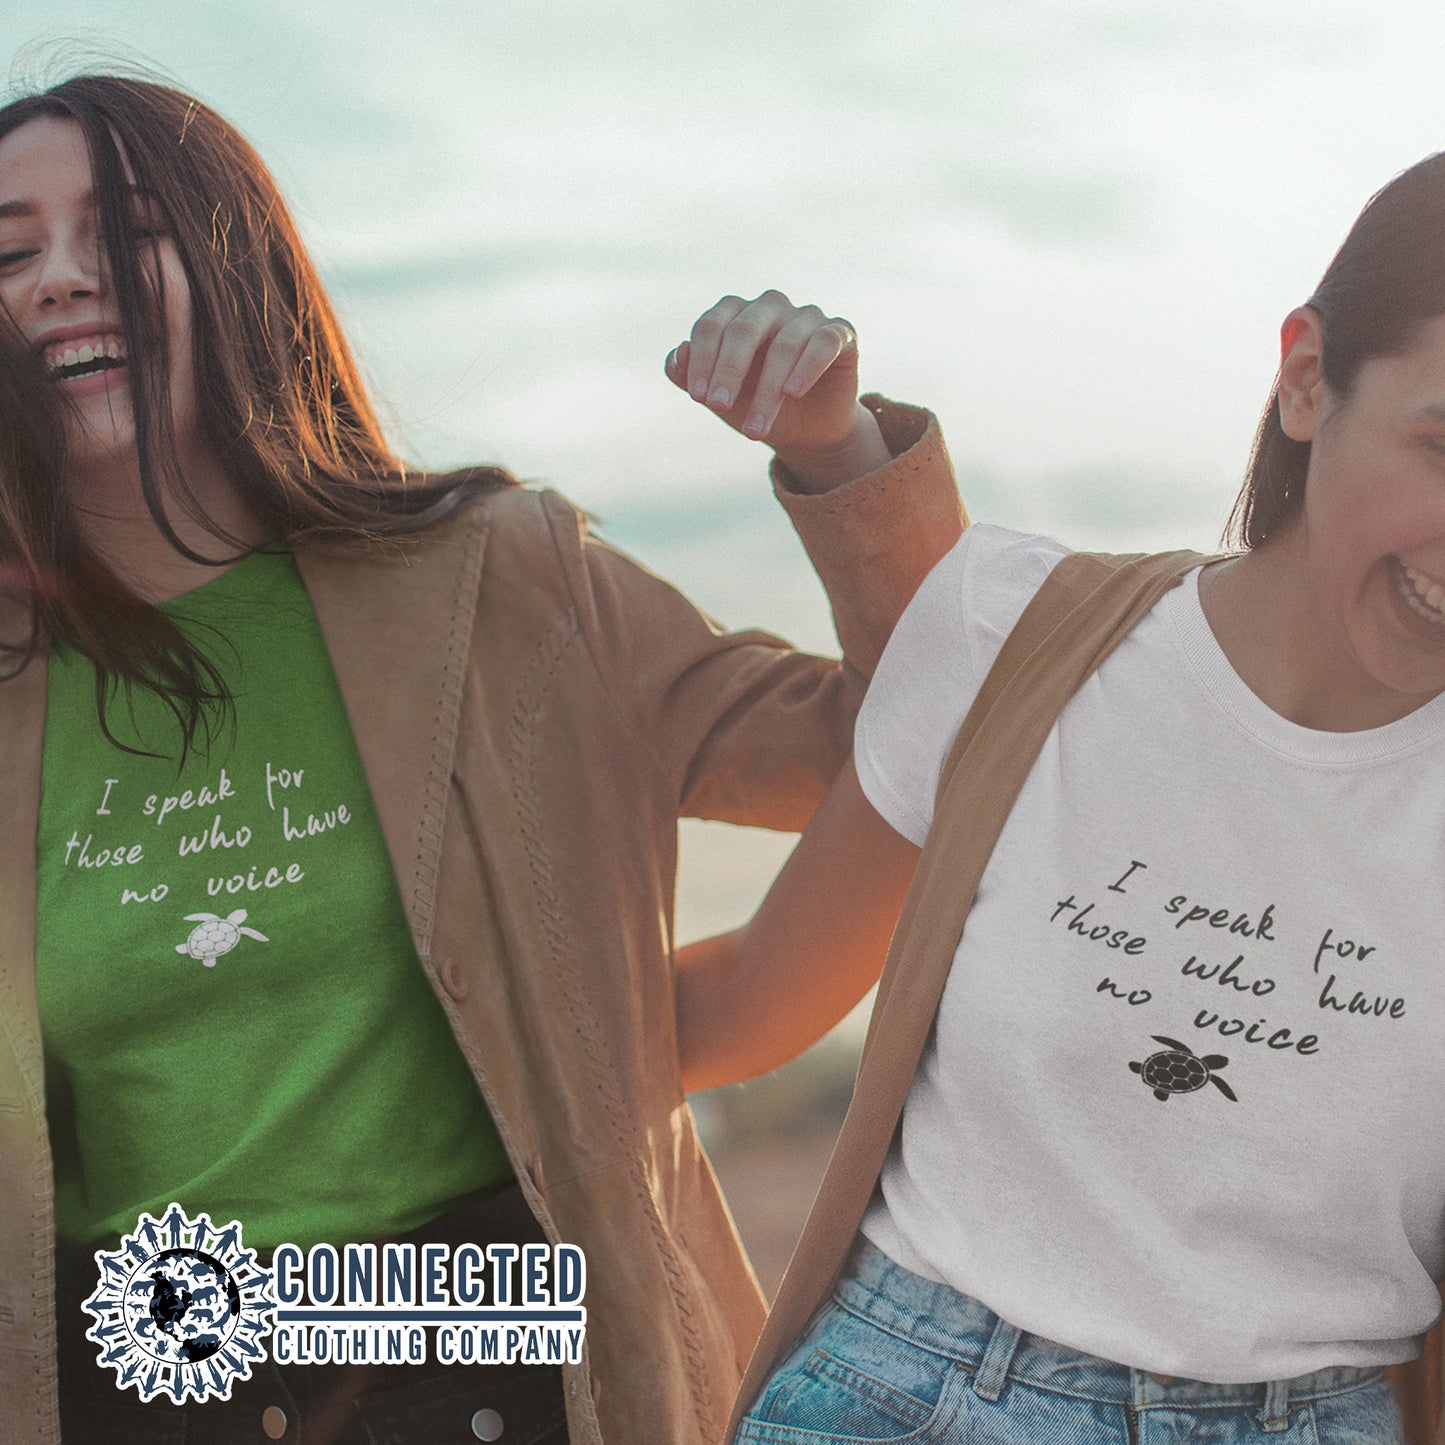 2 Friends Wearing A Kelly Green Be The Voice Sea Turtle Tee reads "I speak for those who have no voice." And A White Tee - Connected Clothing Company - Ethically and Sustainably Made - 10% donated to the Sea Turtle Conservancy